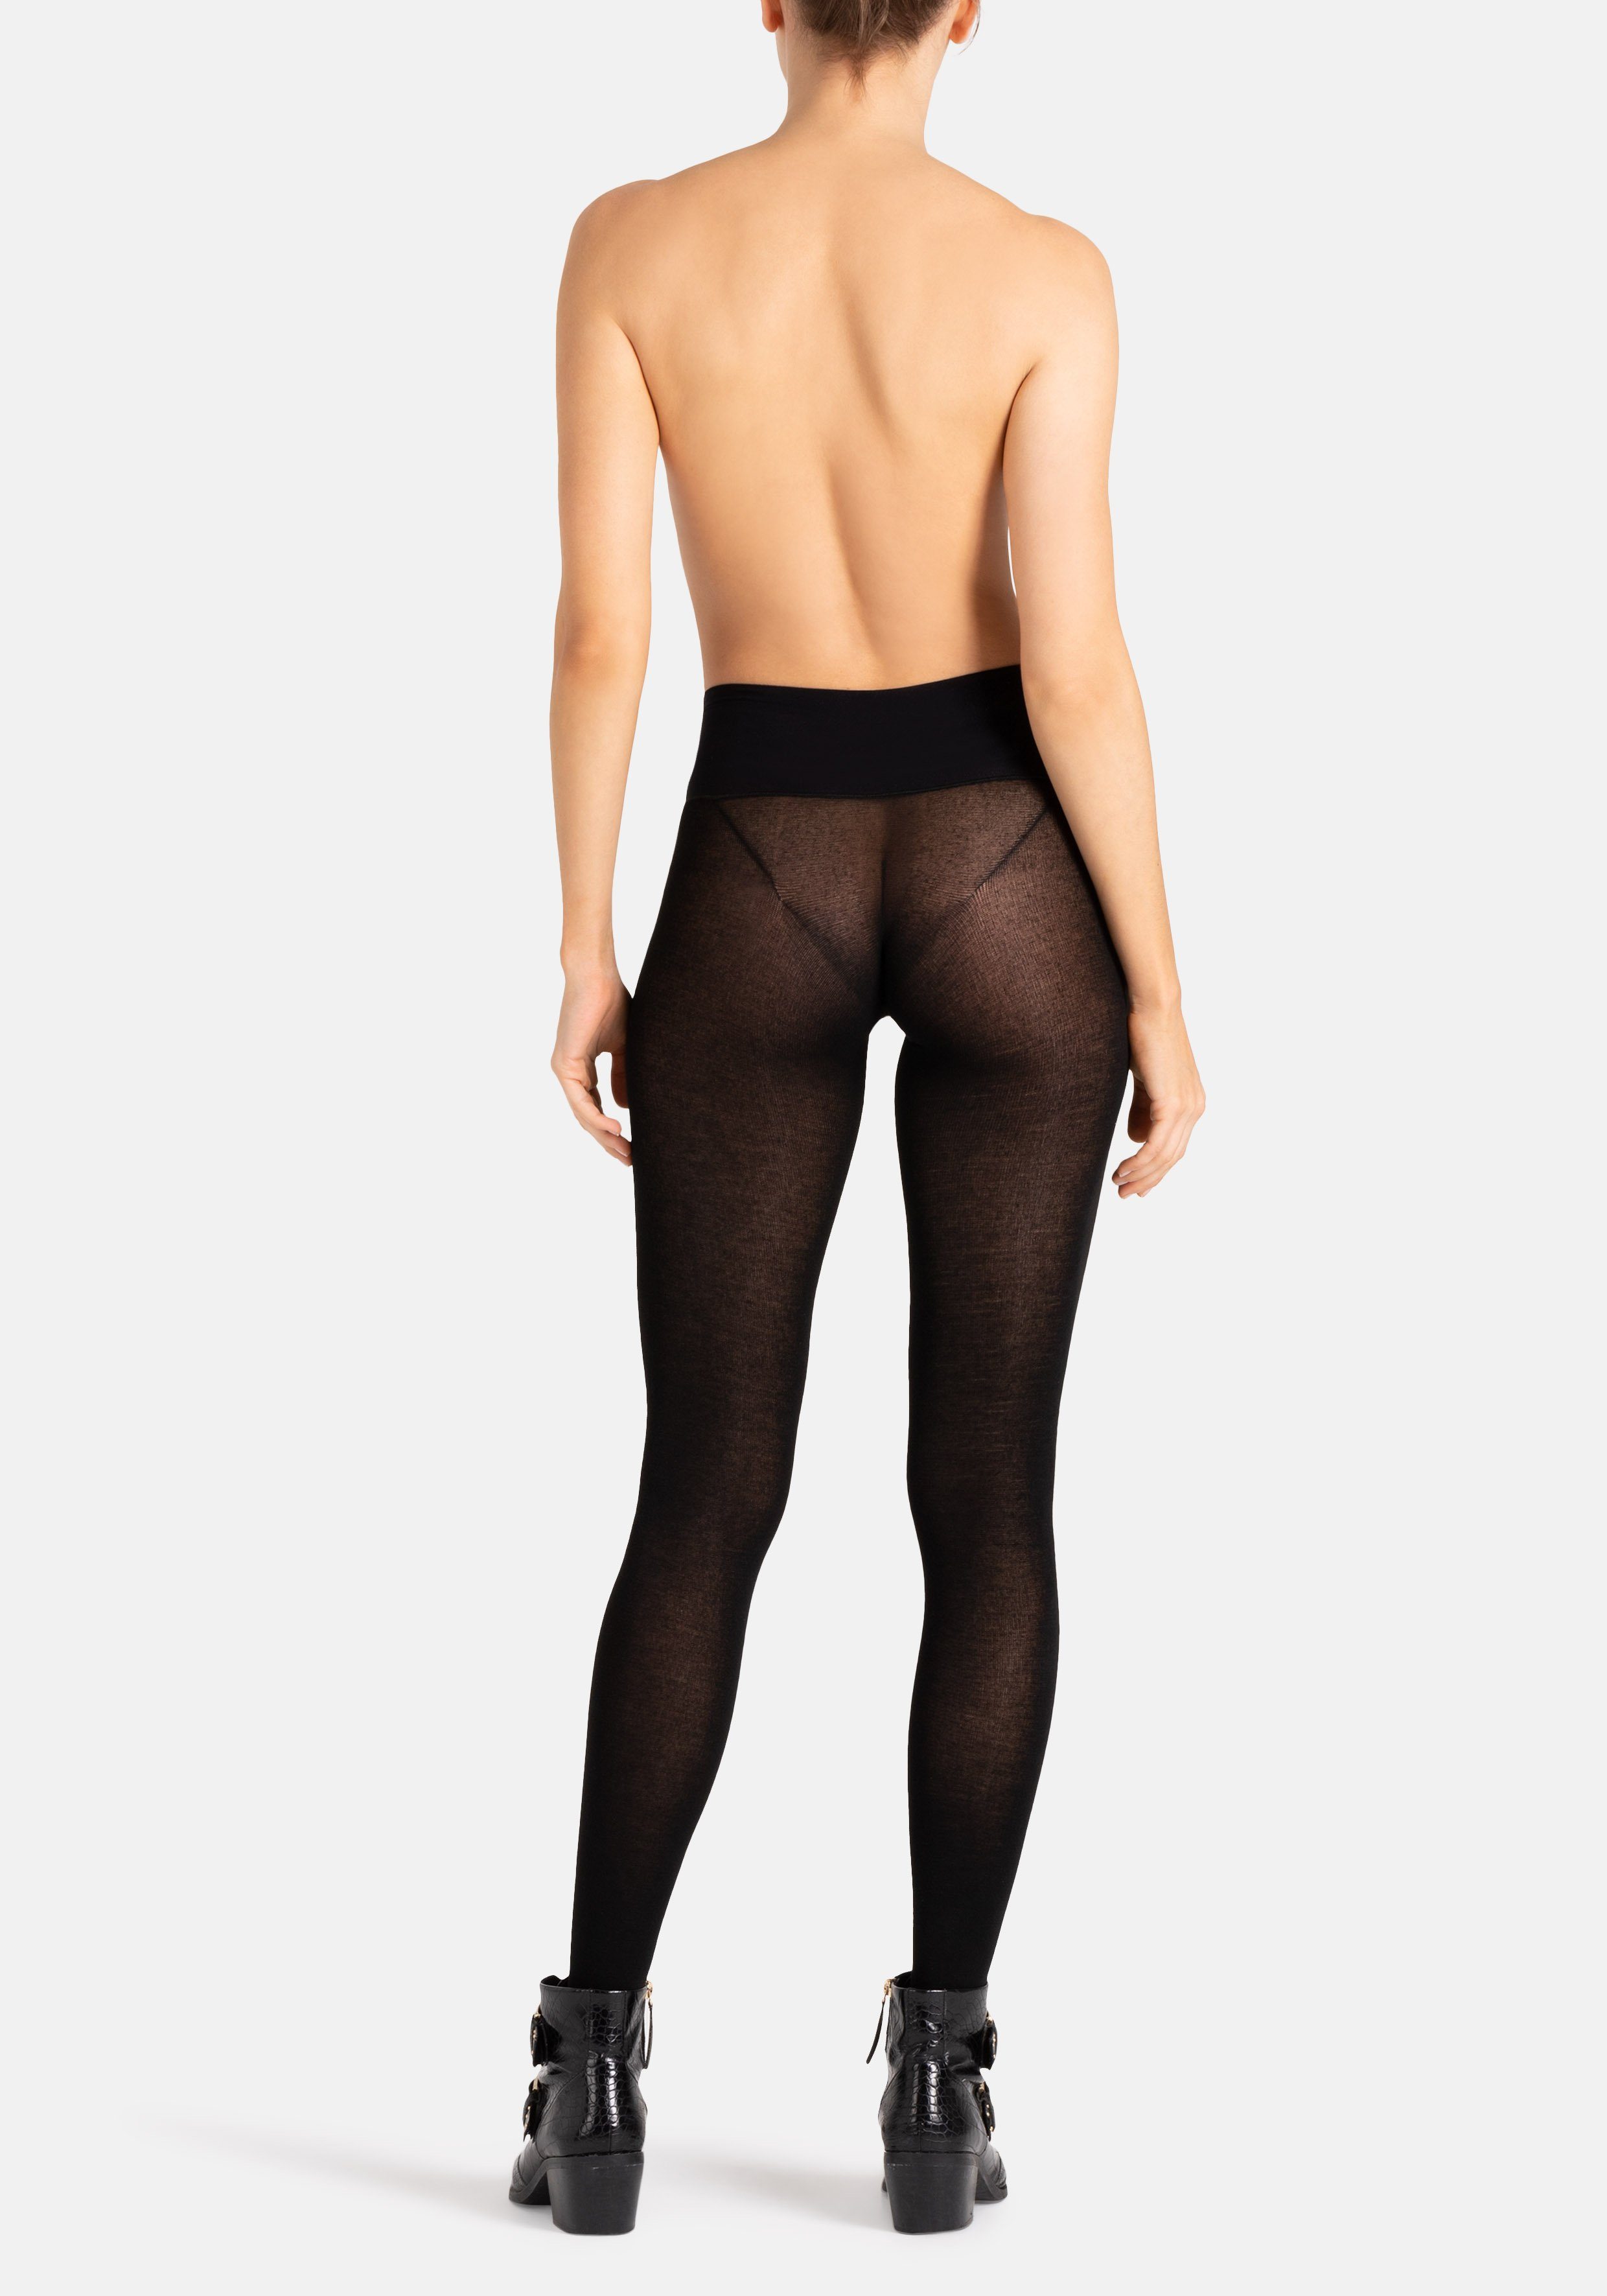 Too Hot To Hide (1 Supersoft St) schwarz Strumpfhose Paola Pack 1er